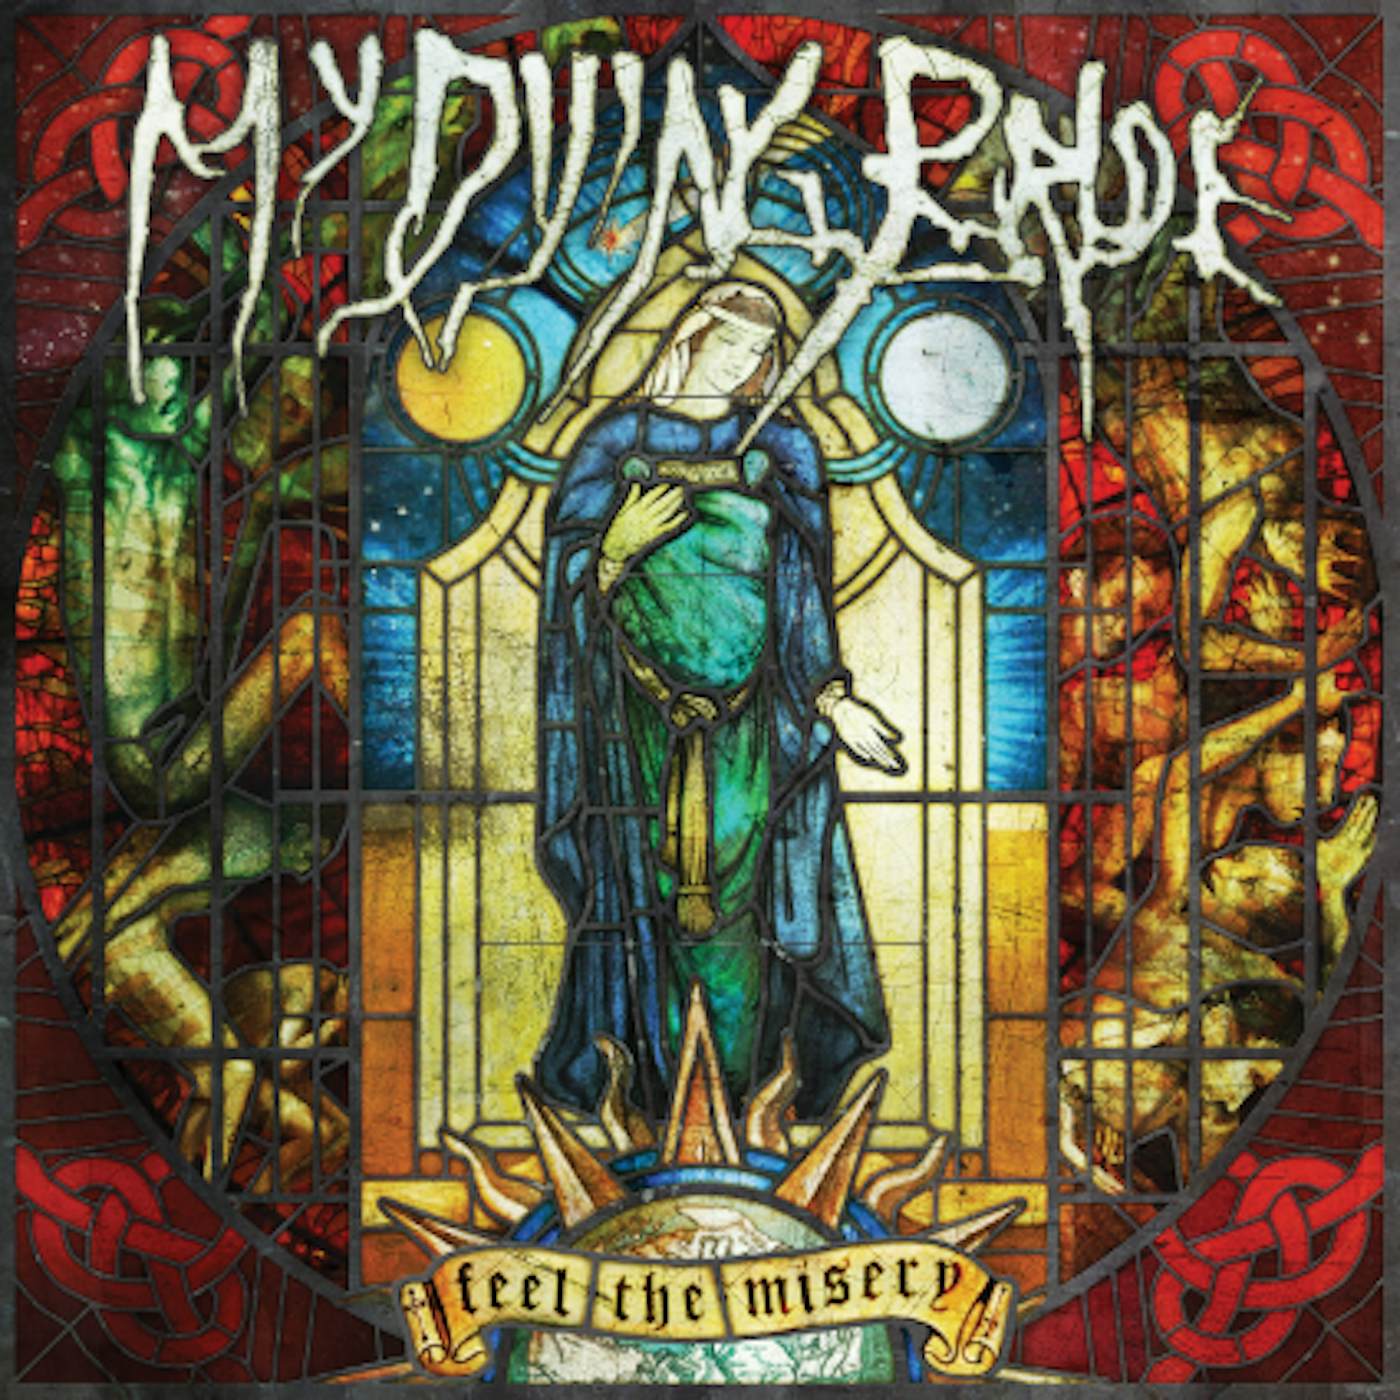 My Dying Bride FEEL THE MISERY CD